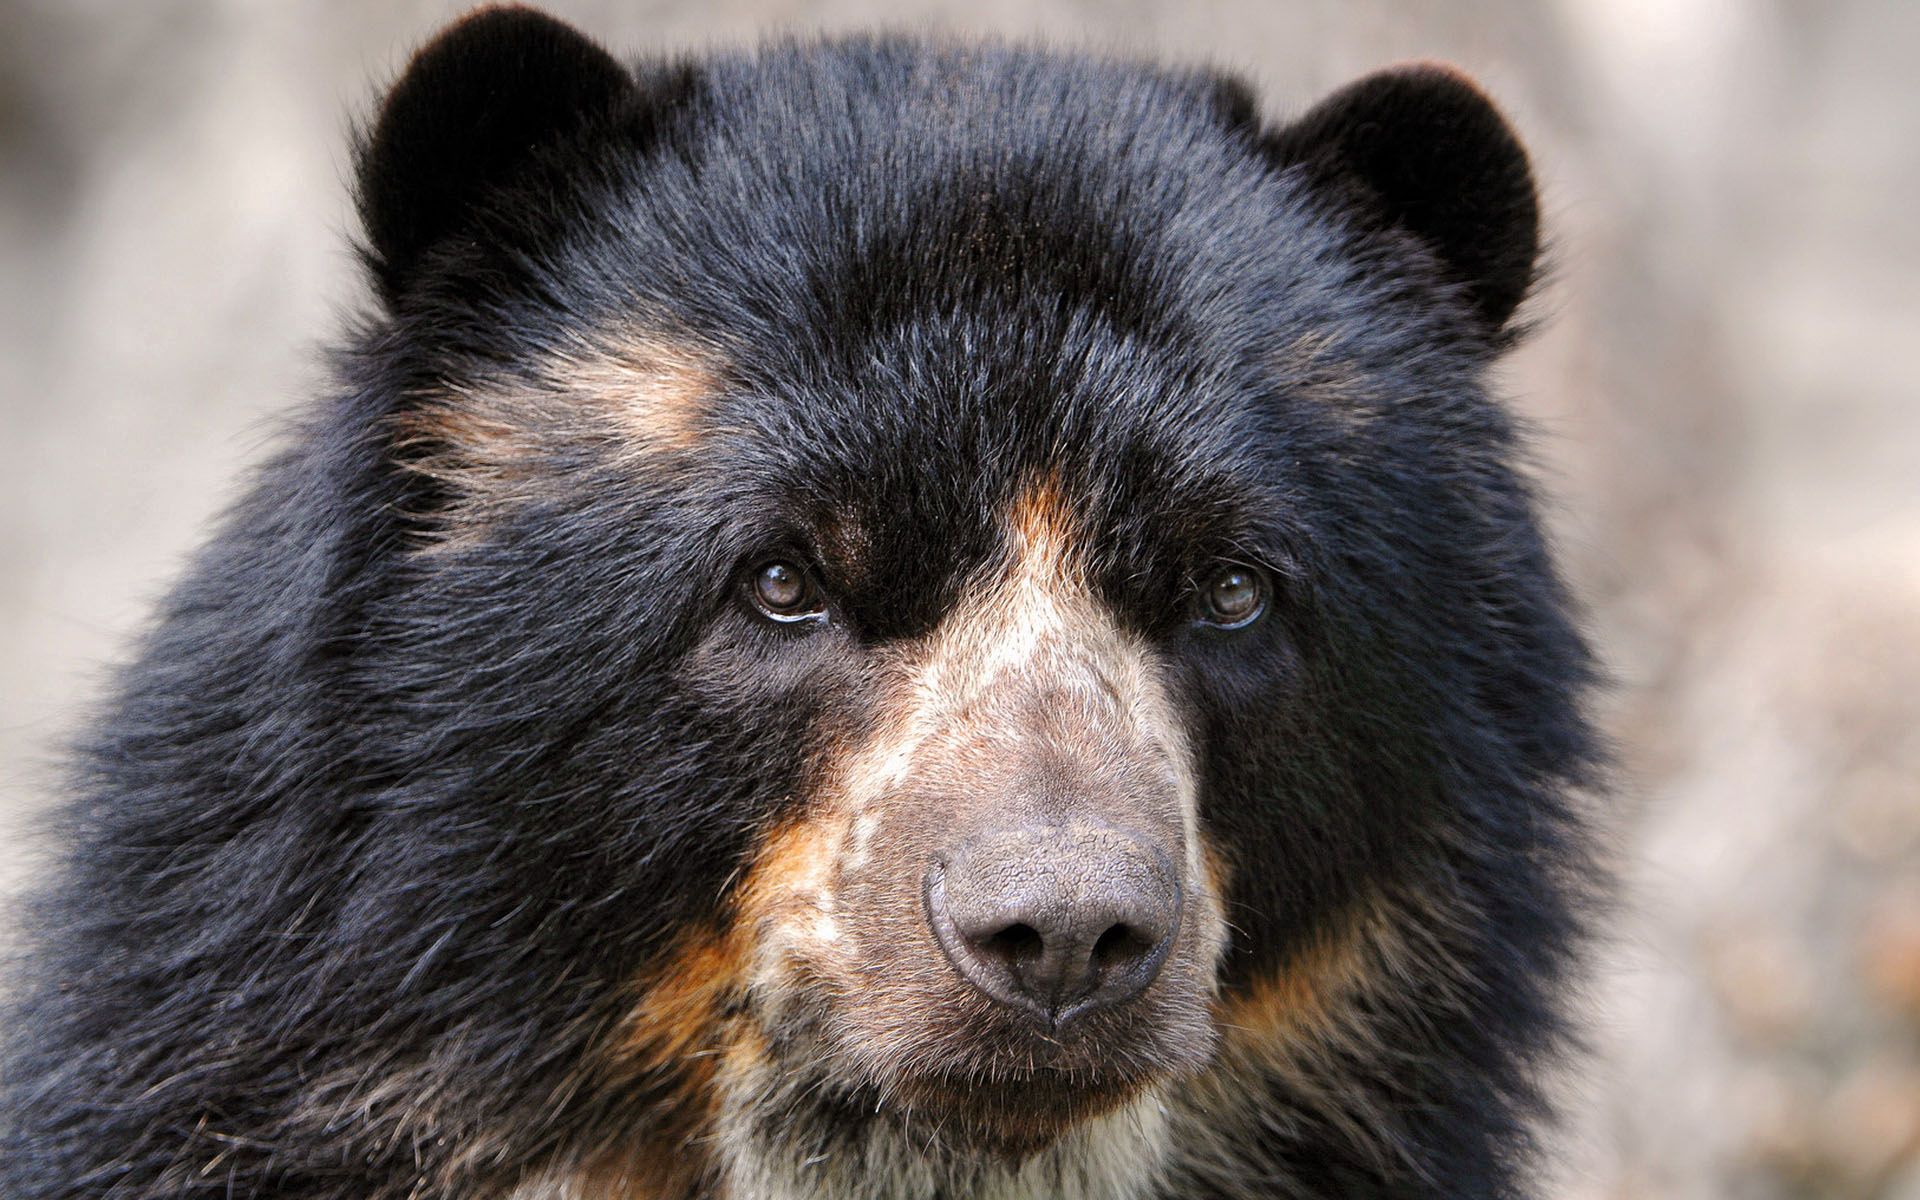 spectacled bear, animals, sight, opinion, nose, wool